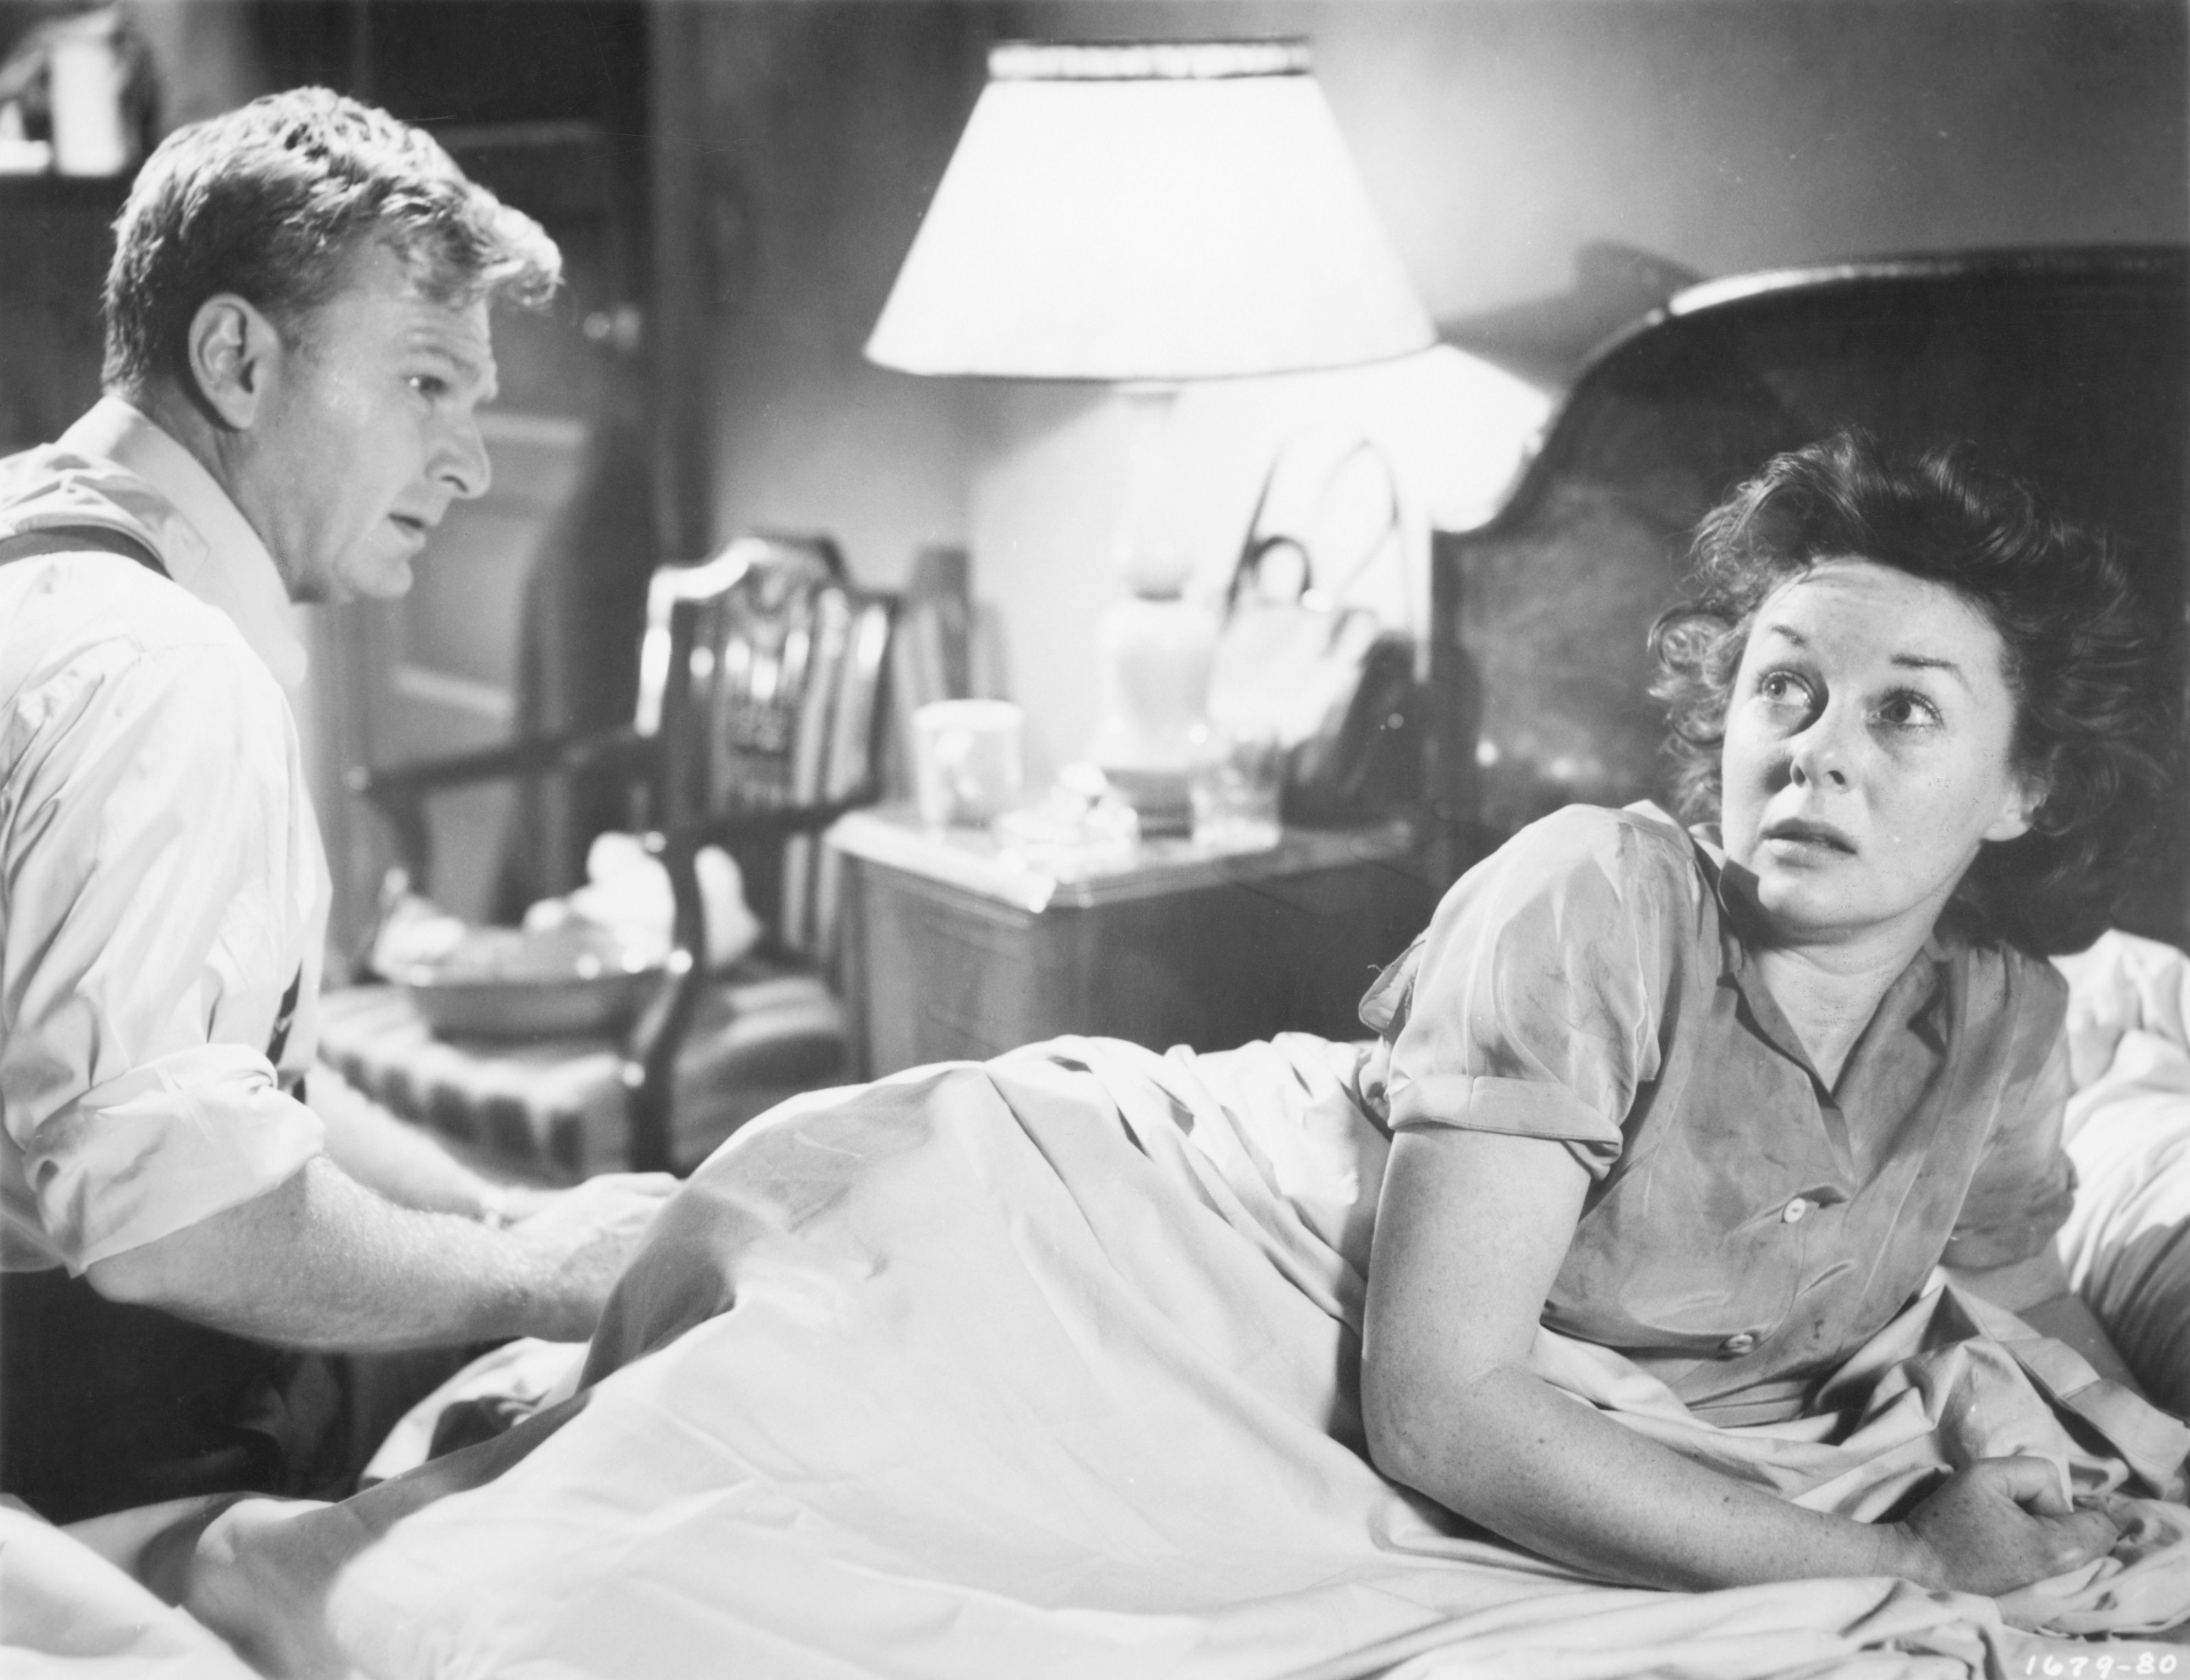 Eddie Albert as Burt McGuire and Susan Hayward as Lillian Roth in the 1955 film I'll Cry Tomorrow. | Source: Getty Images